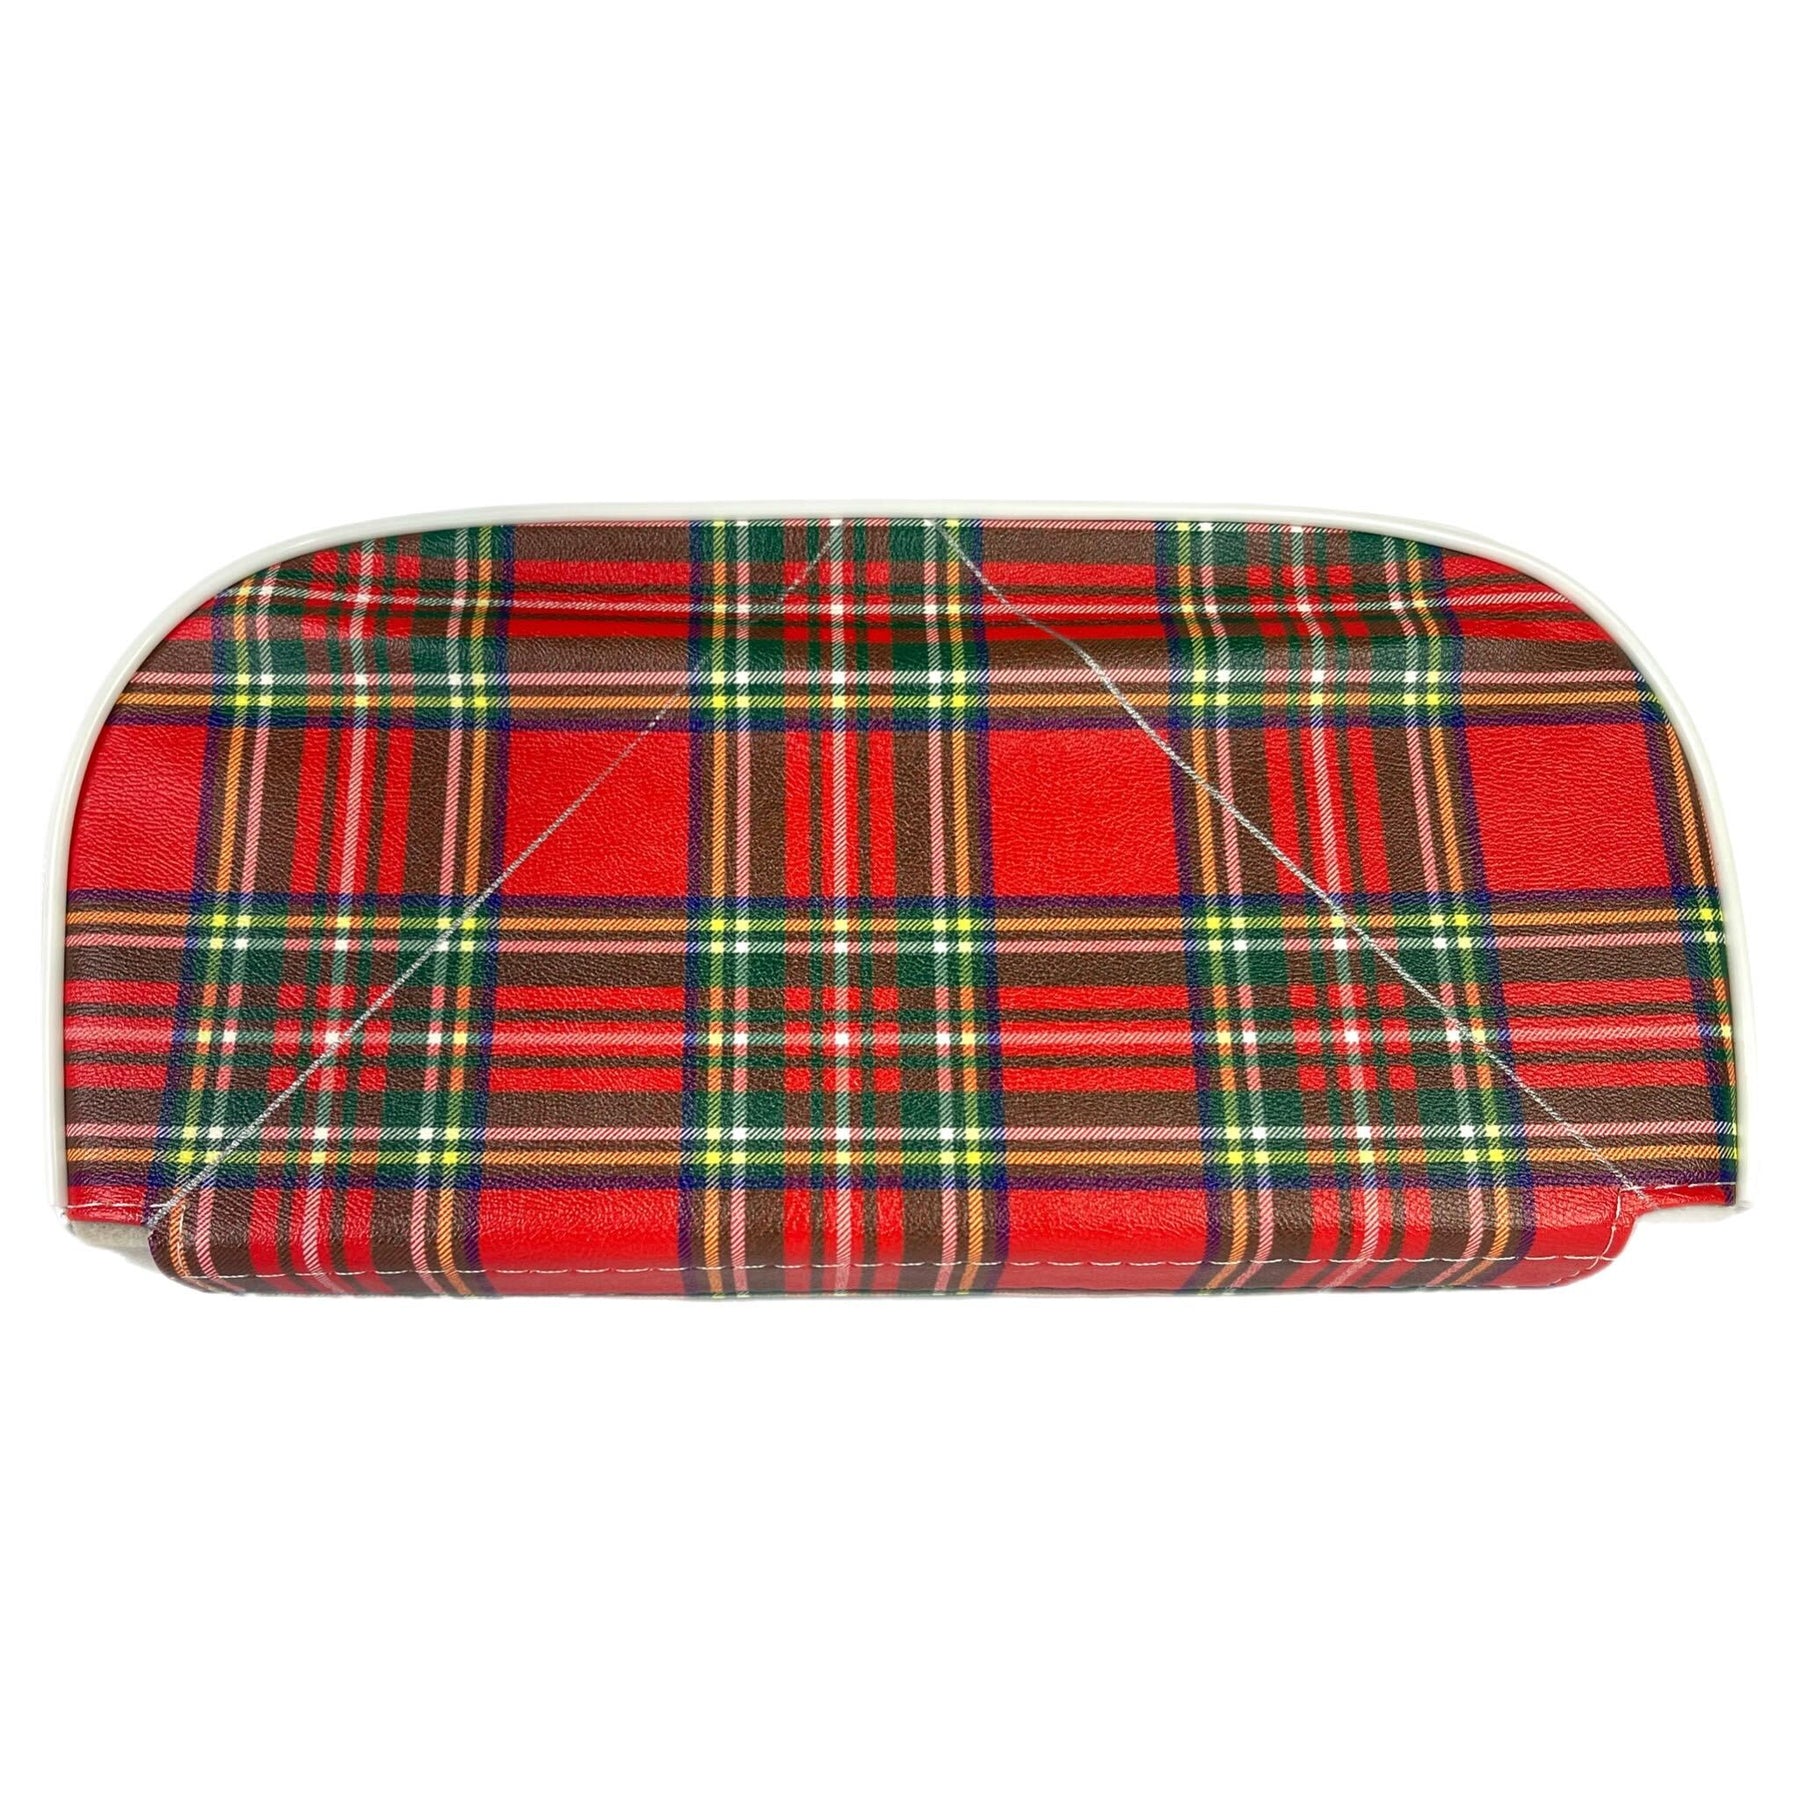 Vespa Lambretta Backrest Replacement Pad For Cuppini Carriers - Red Tartan